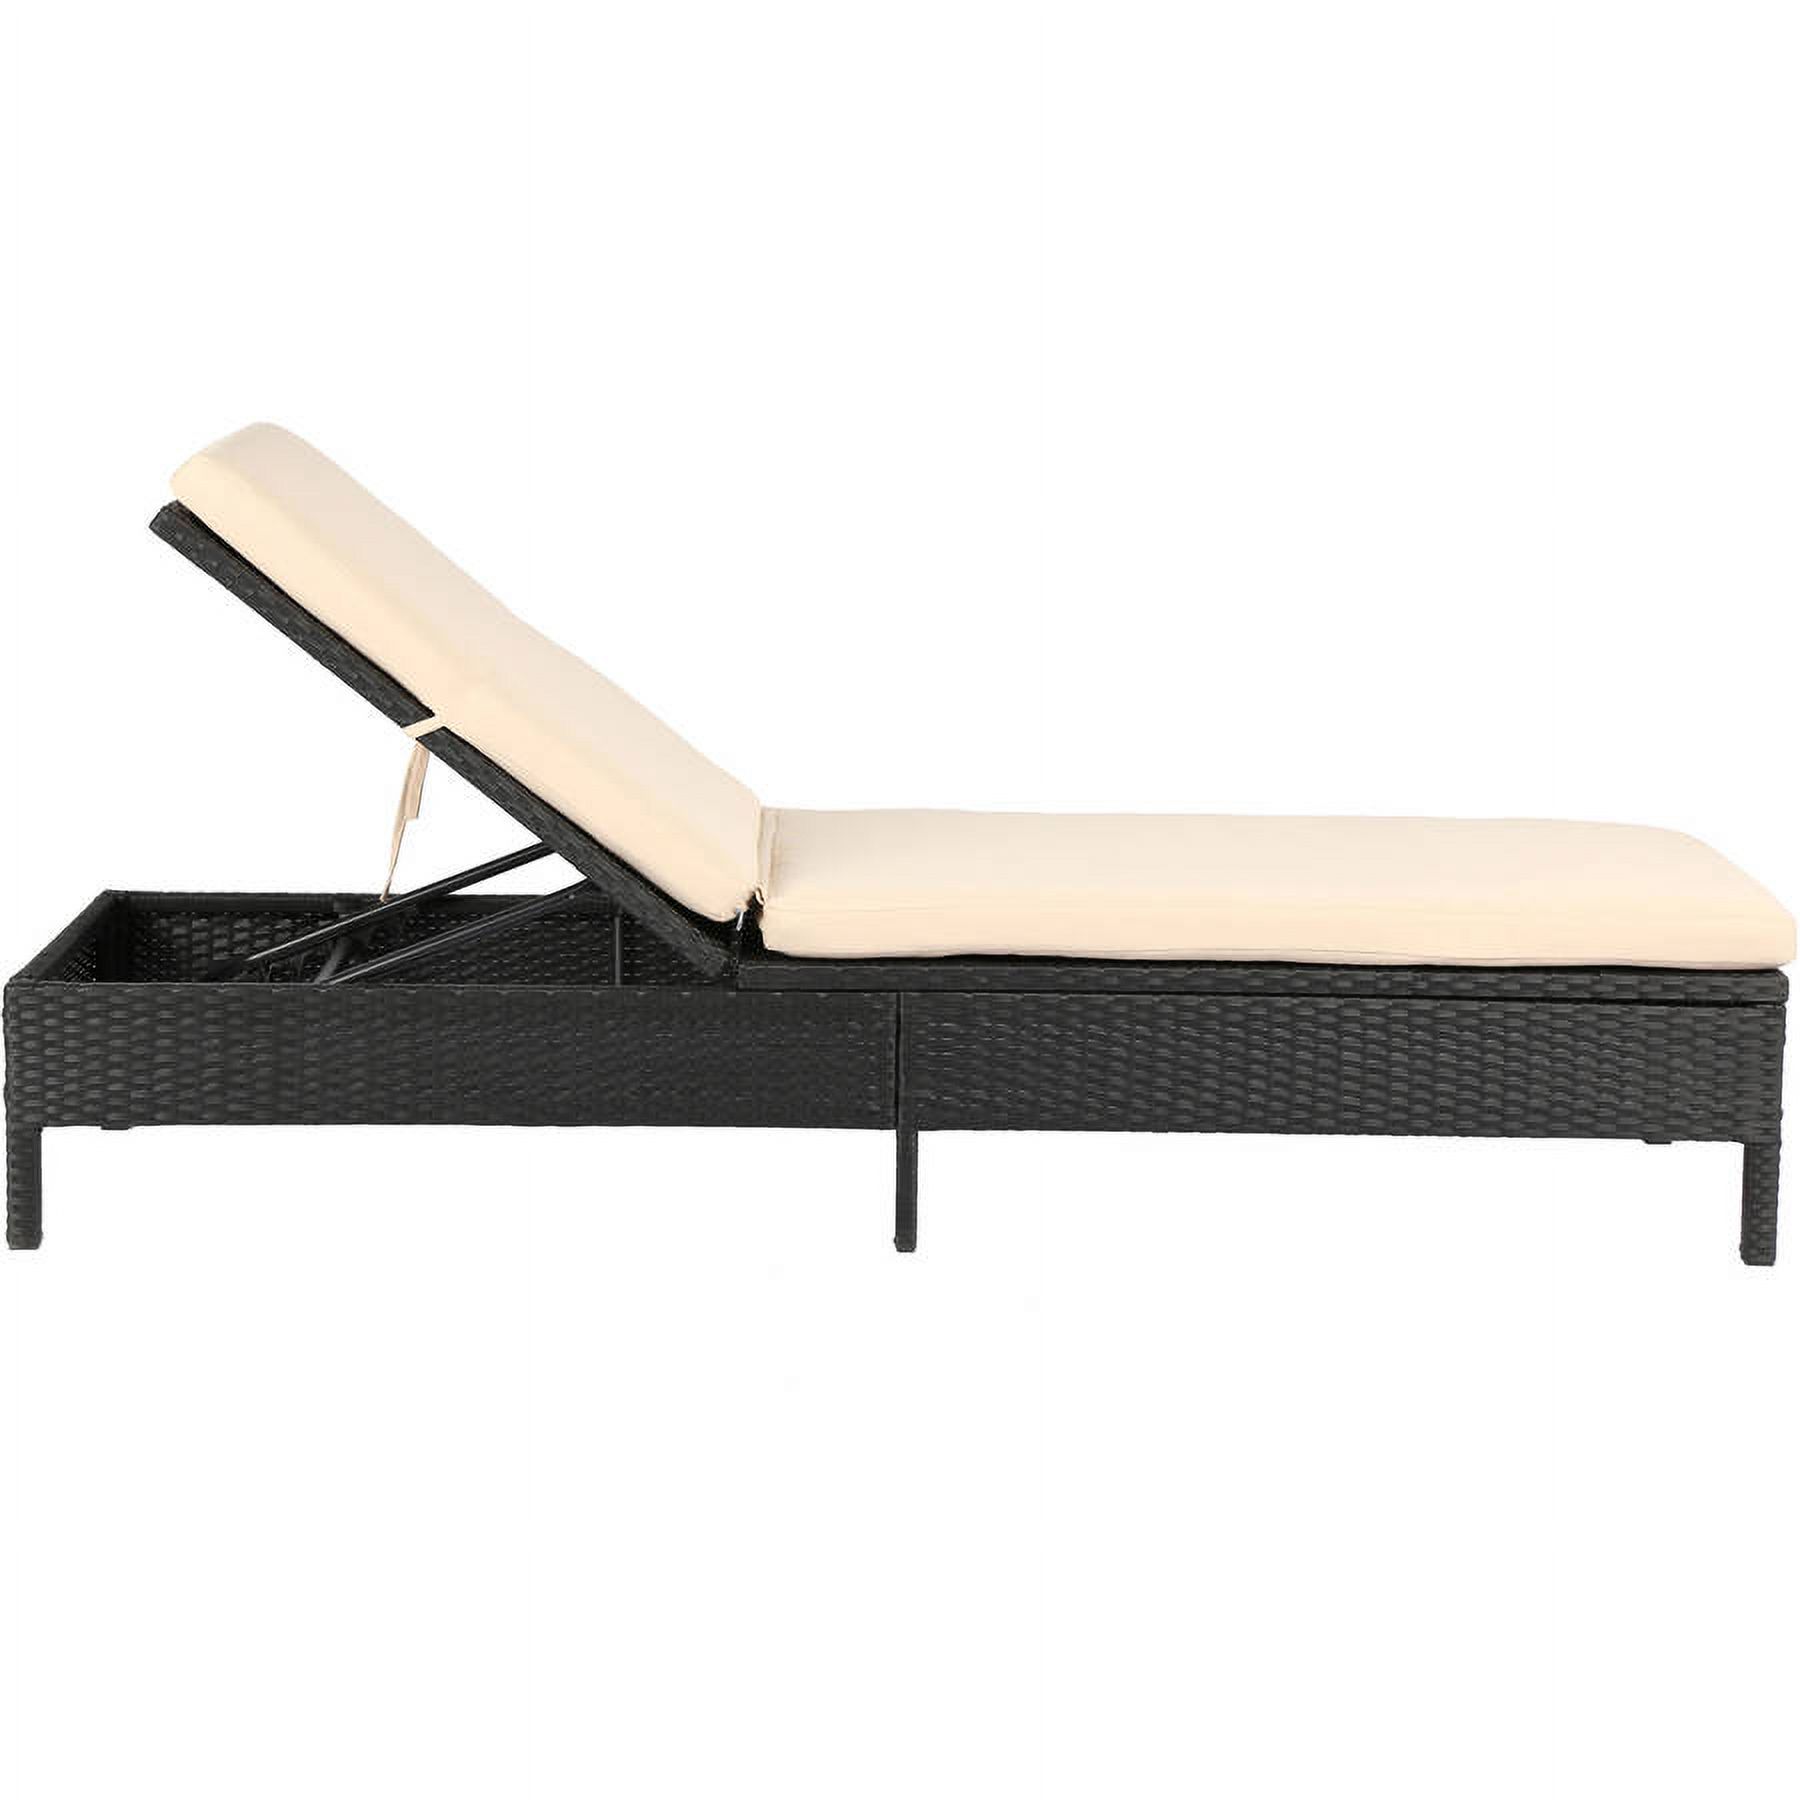 Baner Garden Adjustable Chaise Lounge with Cushions - image 3 of 9